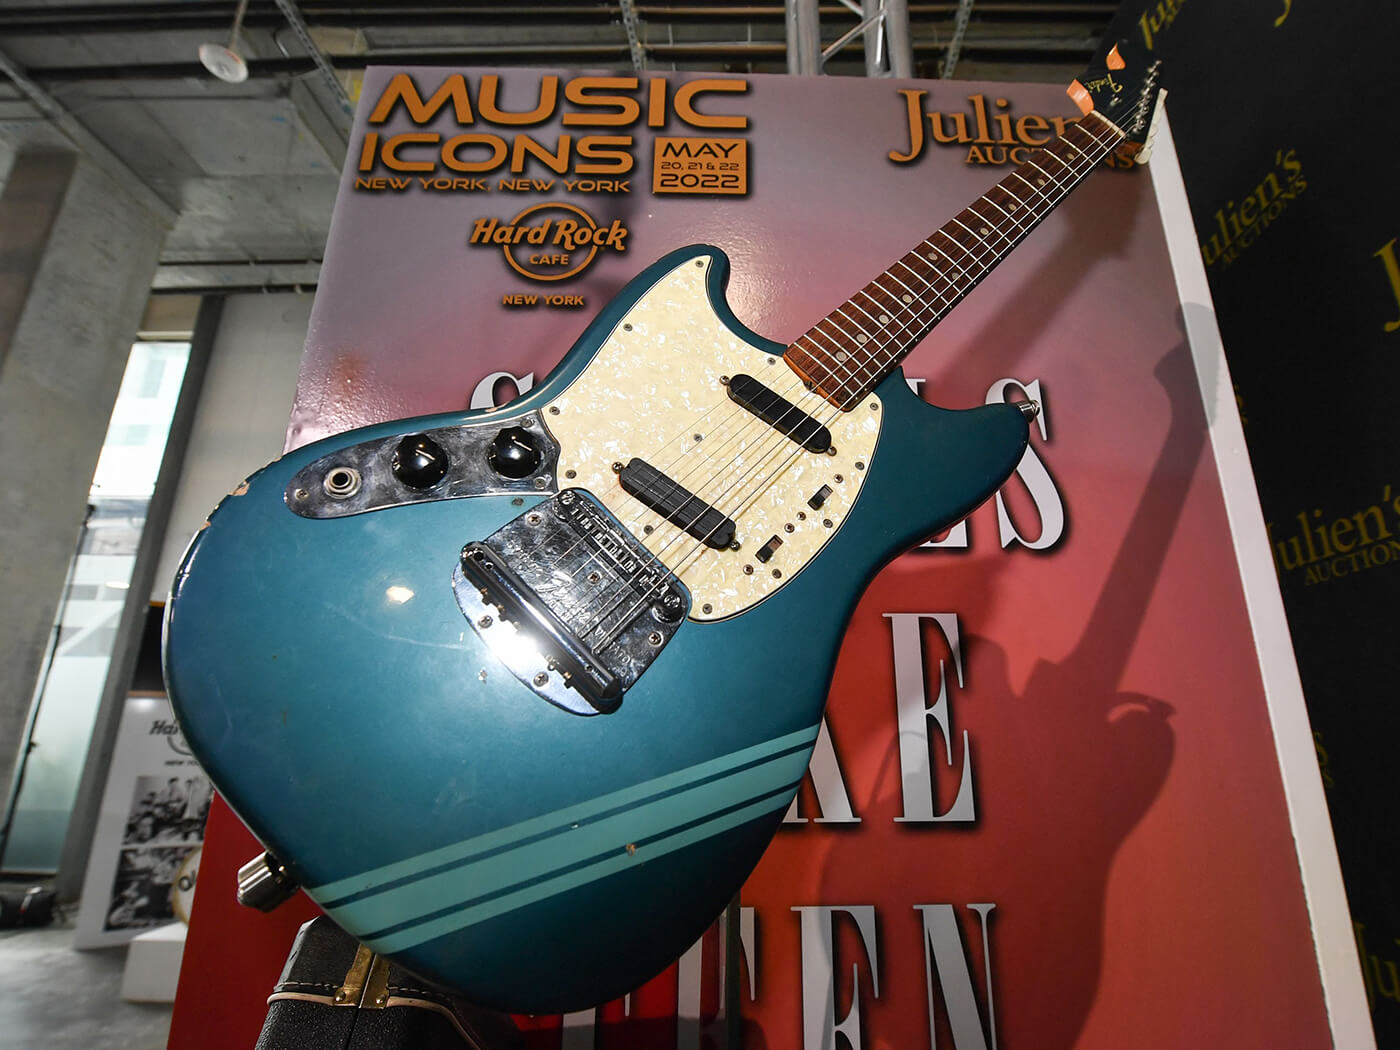 Kurt Cobain’s 1969 blue Fender Mustang on display, photo by Robyn Beck/AFP via Getty Images